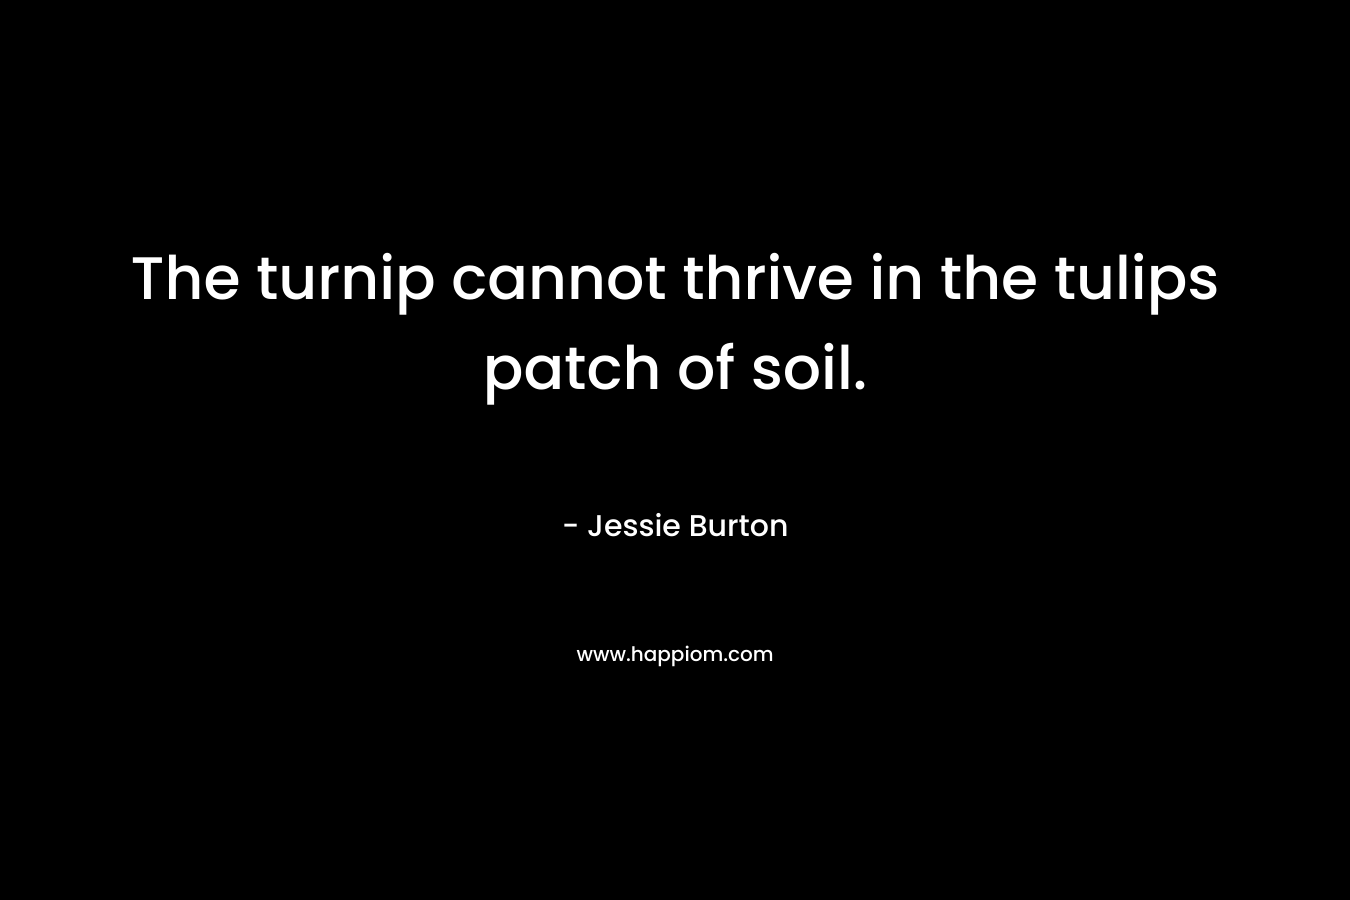 The turnip cannot thrive in the tulips patch of soil. – Jessie Burton